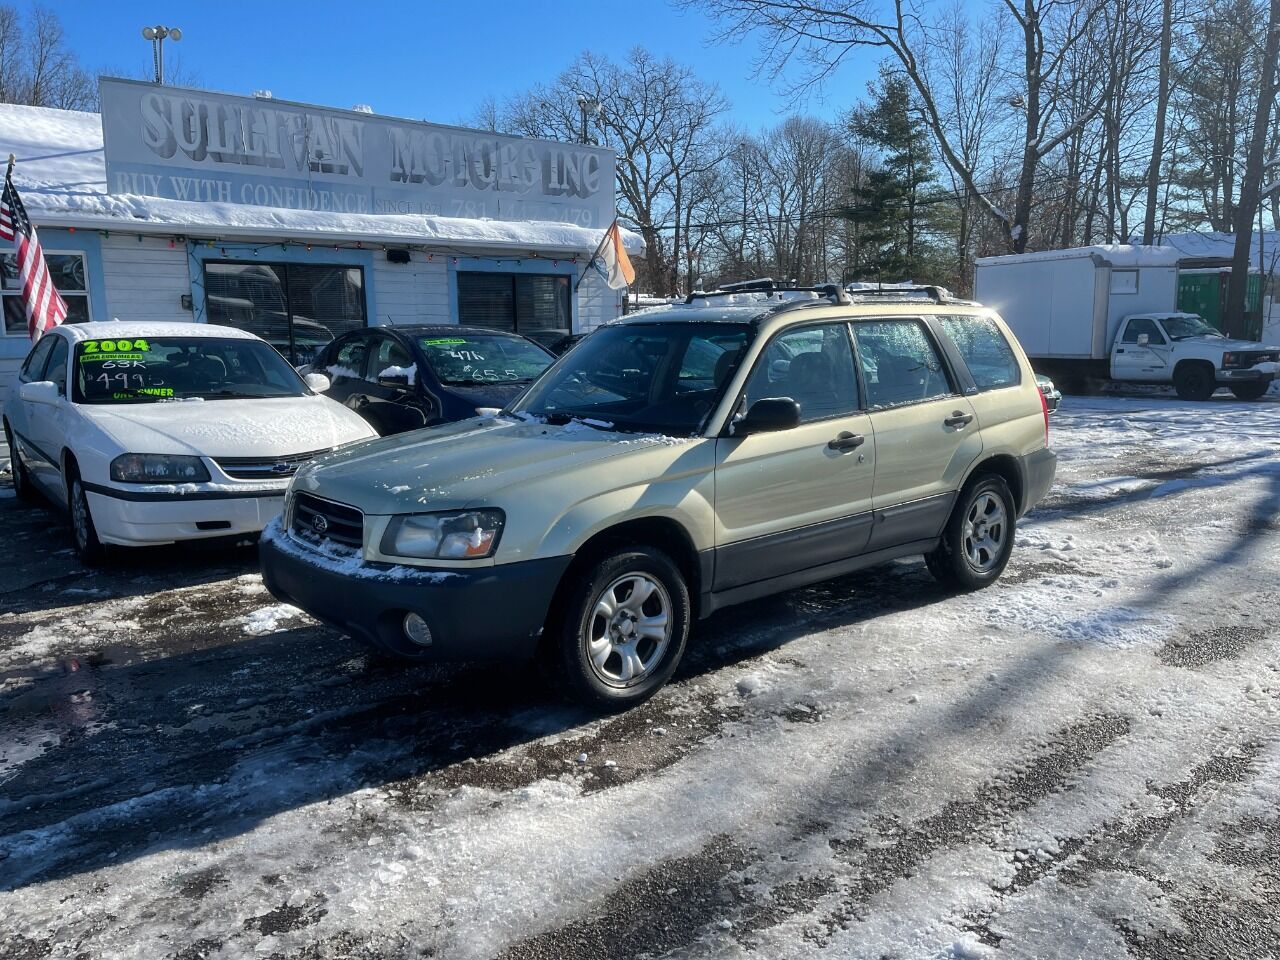 2003 Subaru Forester For Sale In Belmont, MA Carsforsale